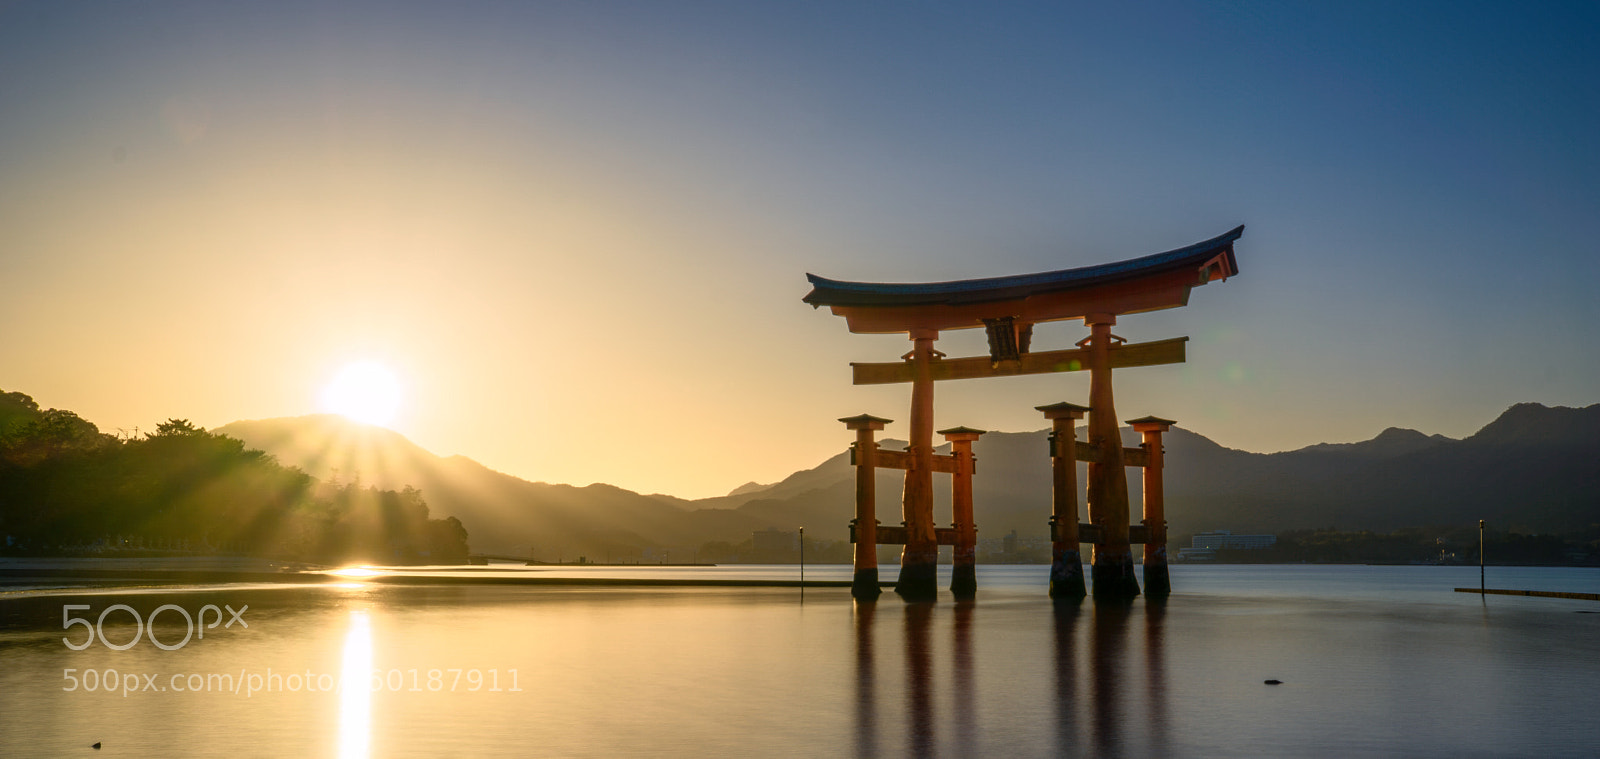 Sony a6000 sample photo. The torii at sunset photography